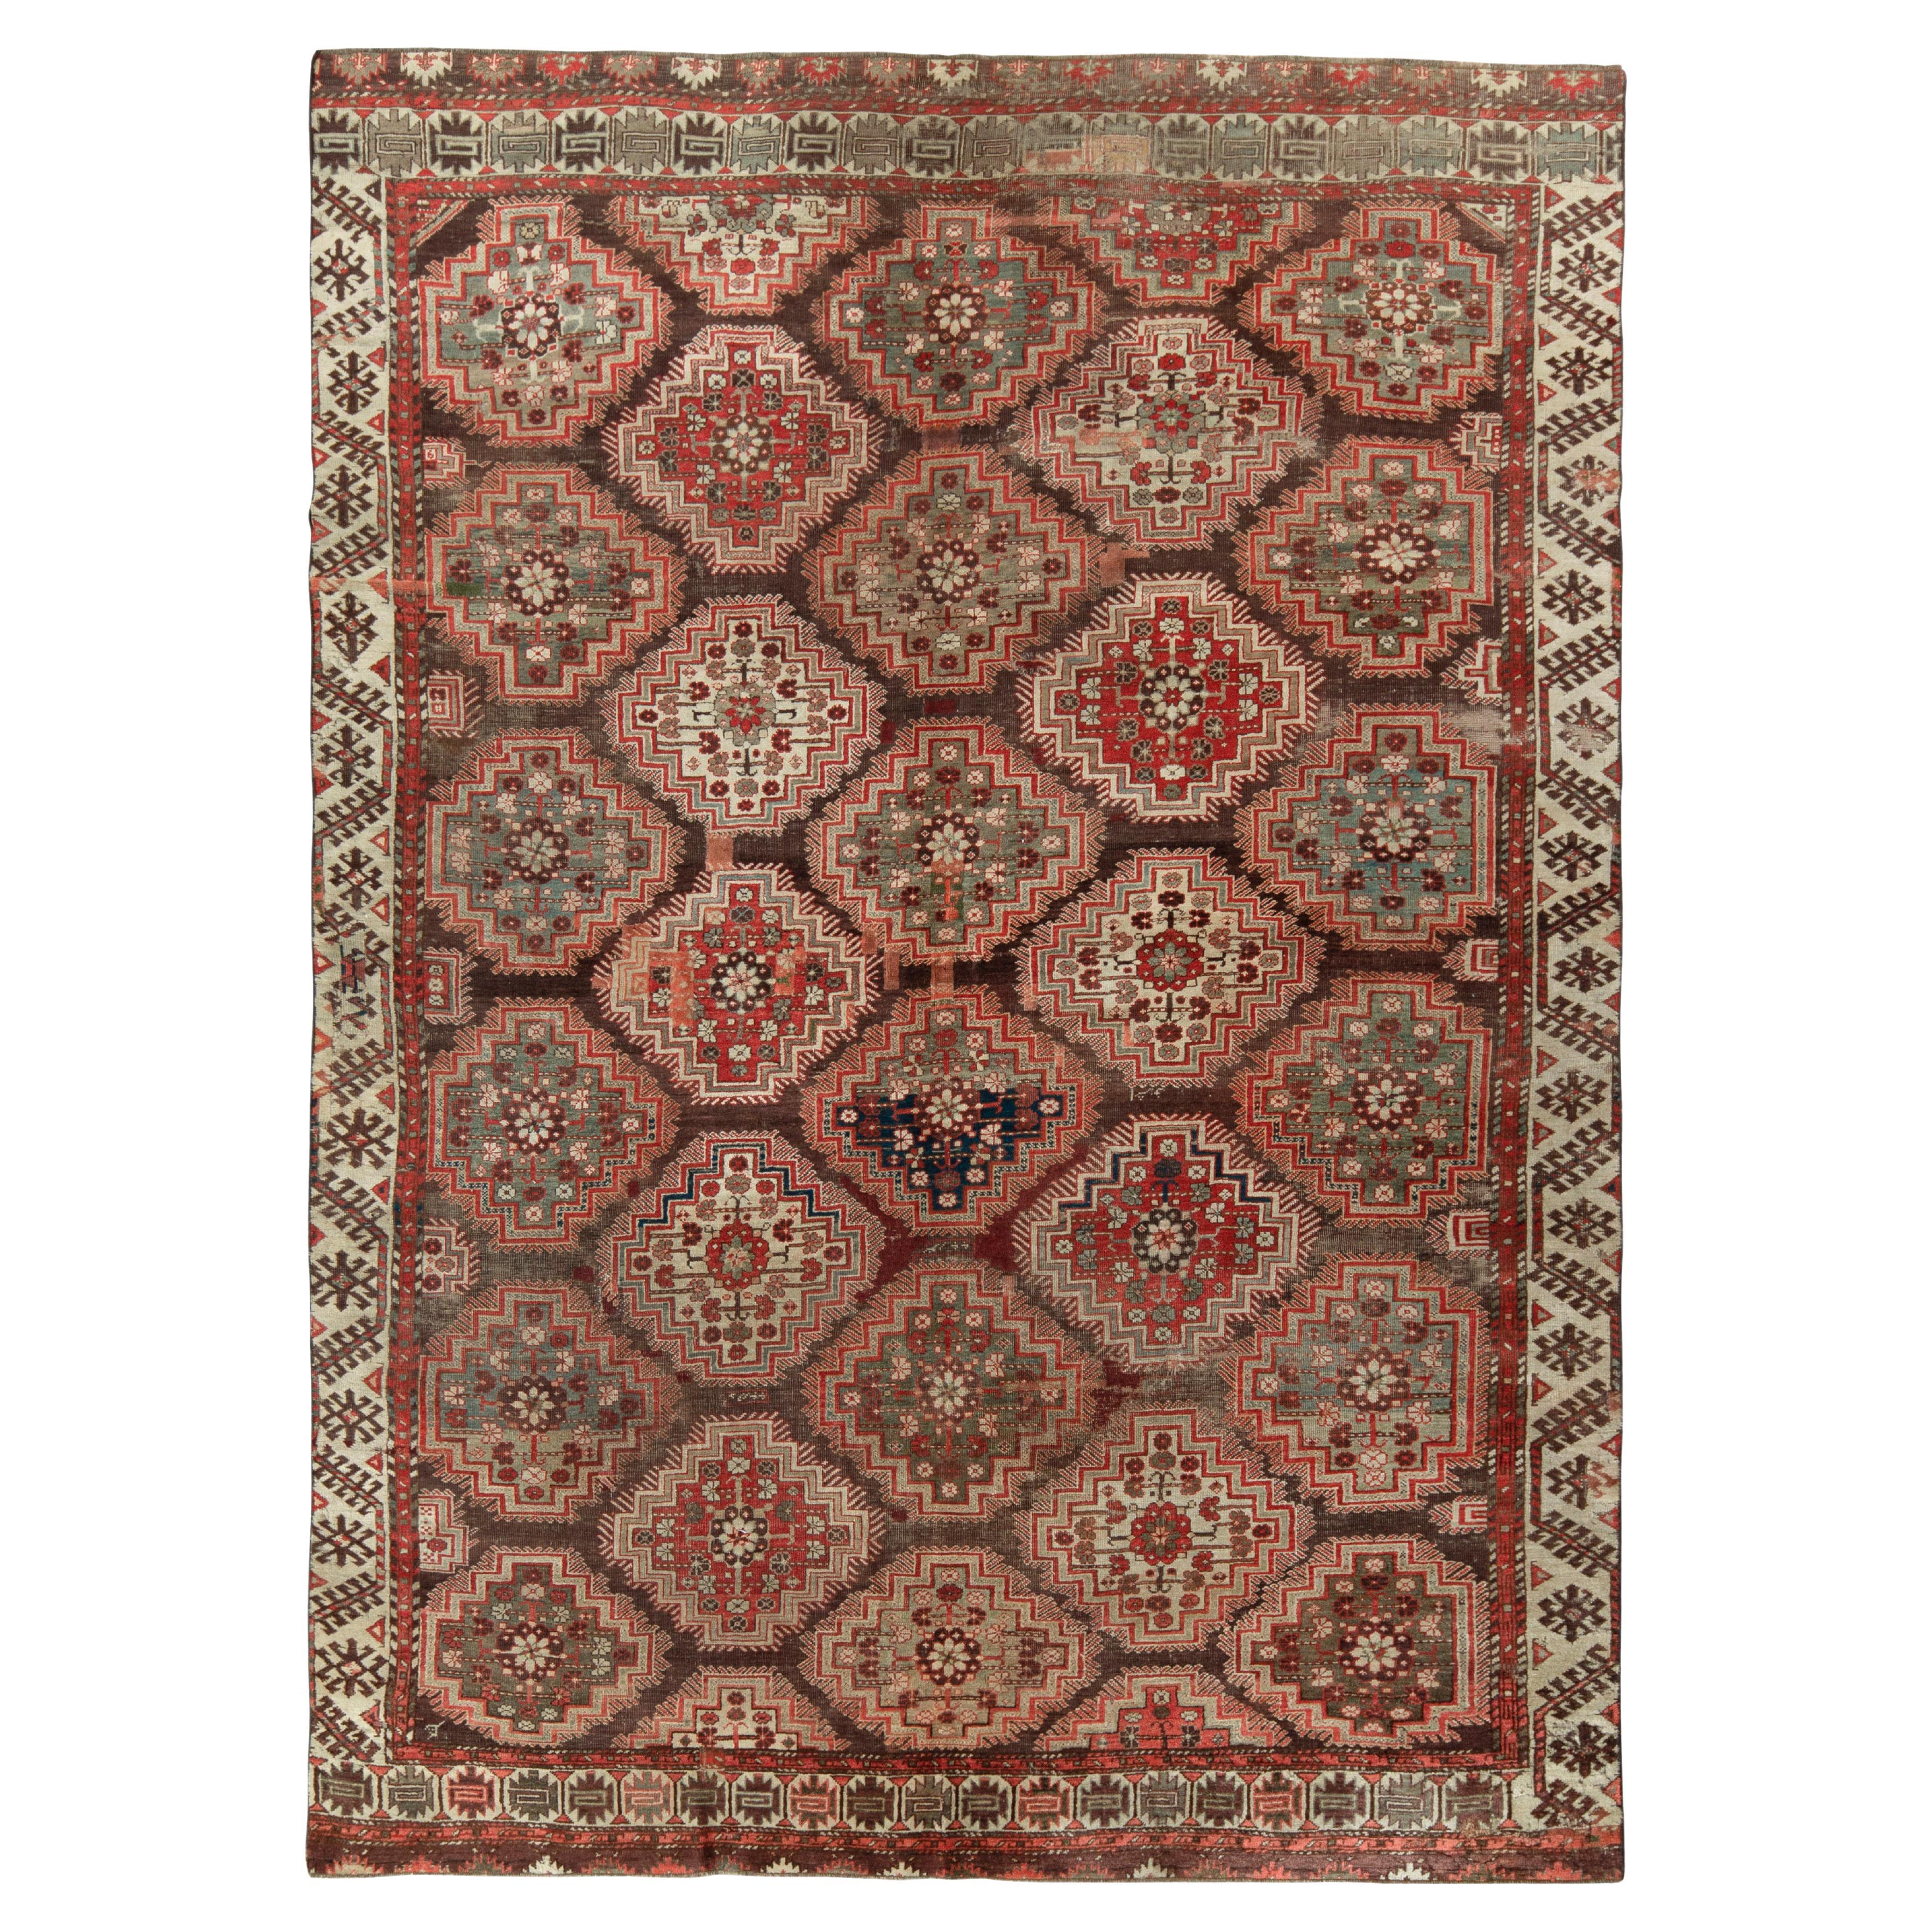 Antique Russian Kuba Rug in All over Red Brown, Geometric Pattern by Rug & Kilim For Sale